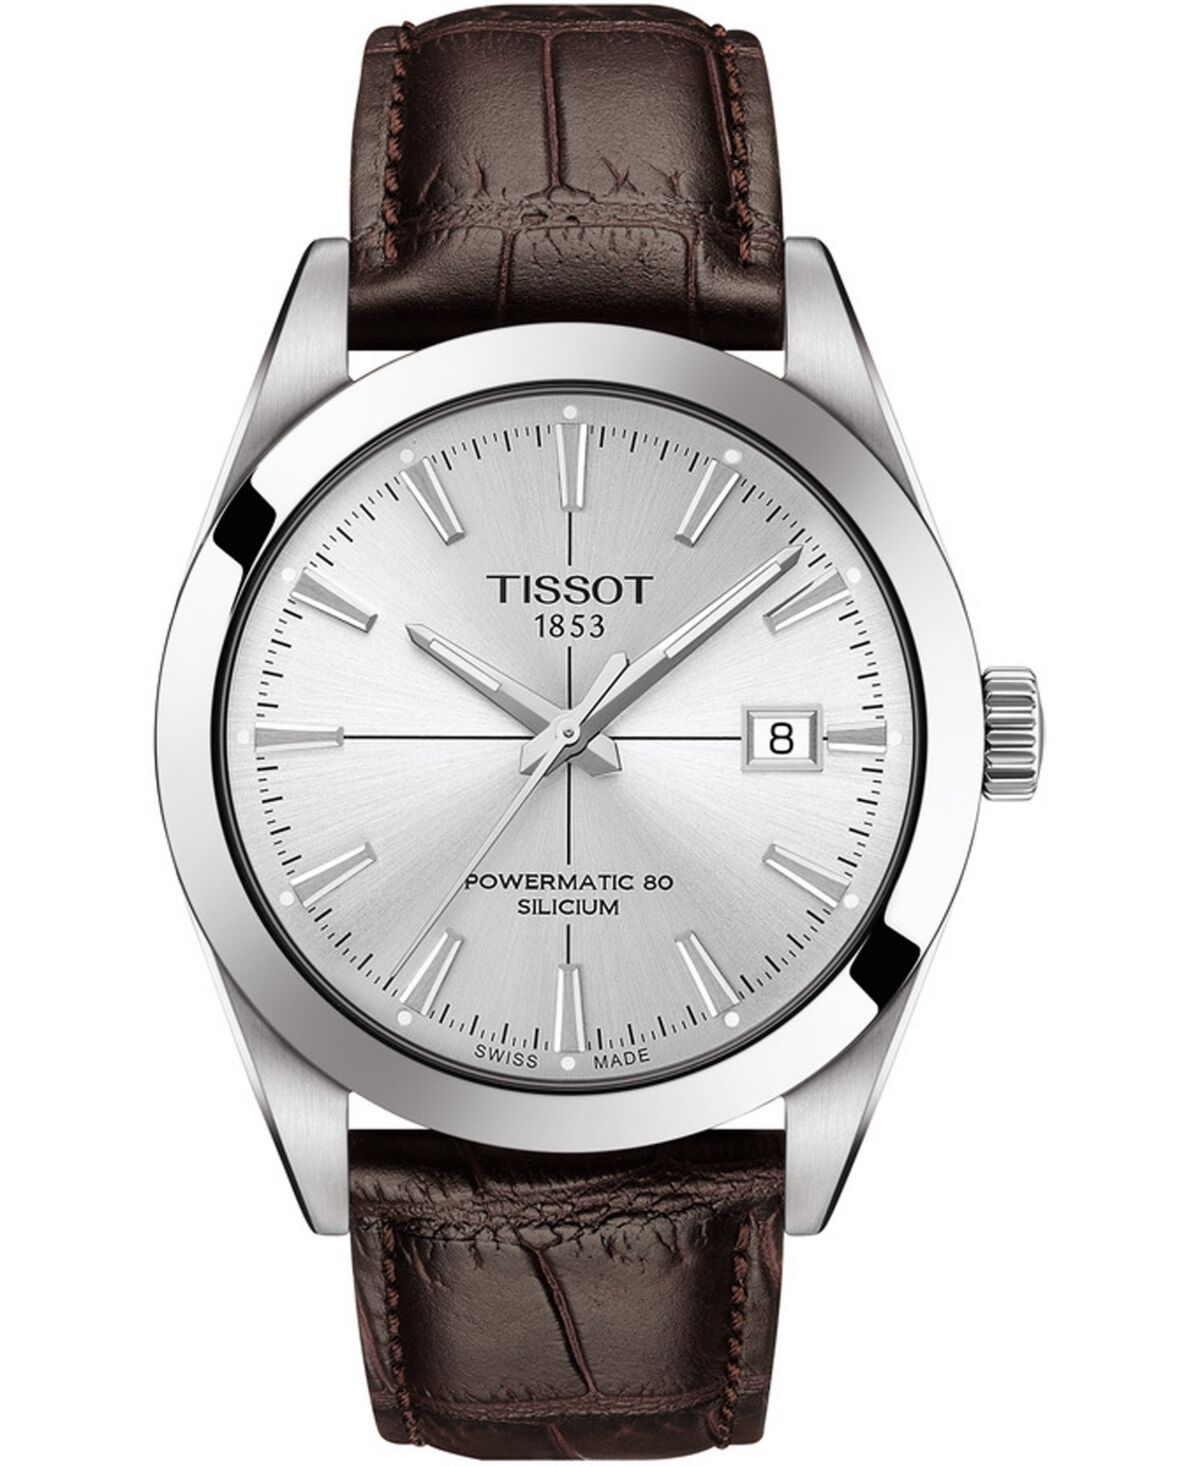 Tissot Men's Swiss Automatic Powermatic 80 Silicium Brown Leather Strap Watch 40mm - Silver